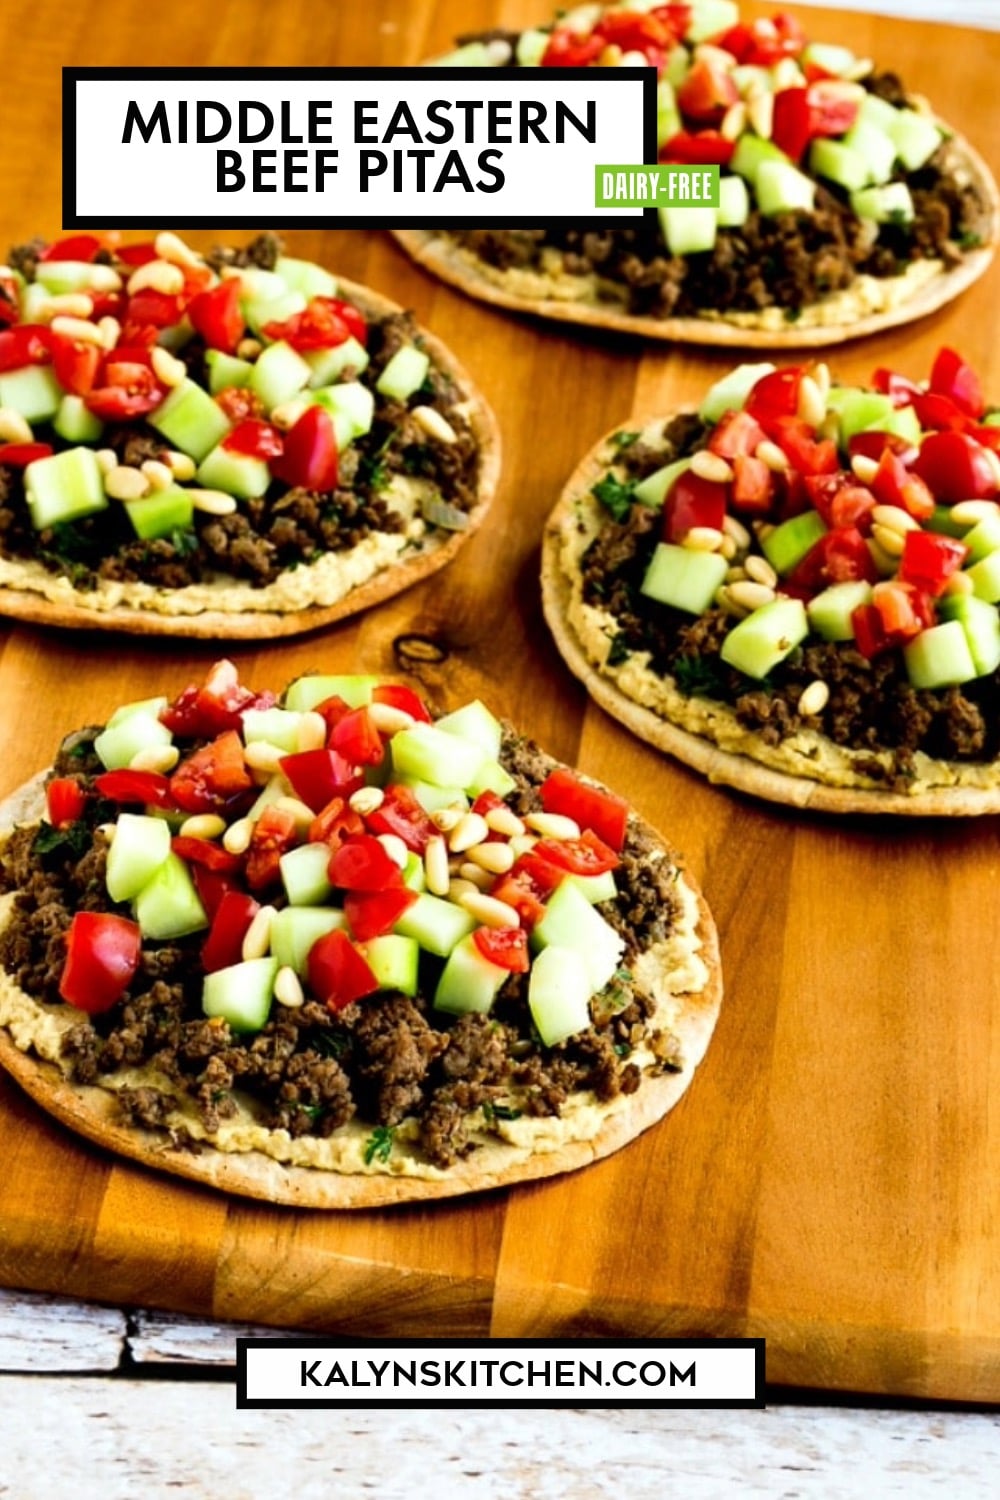 Pinterest image of Middle Eastern Beef Pitas